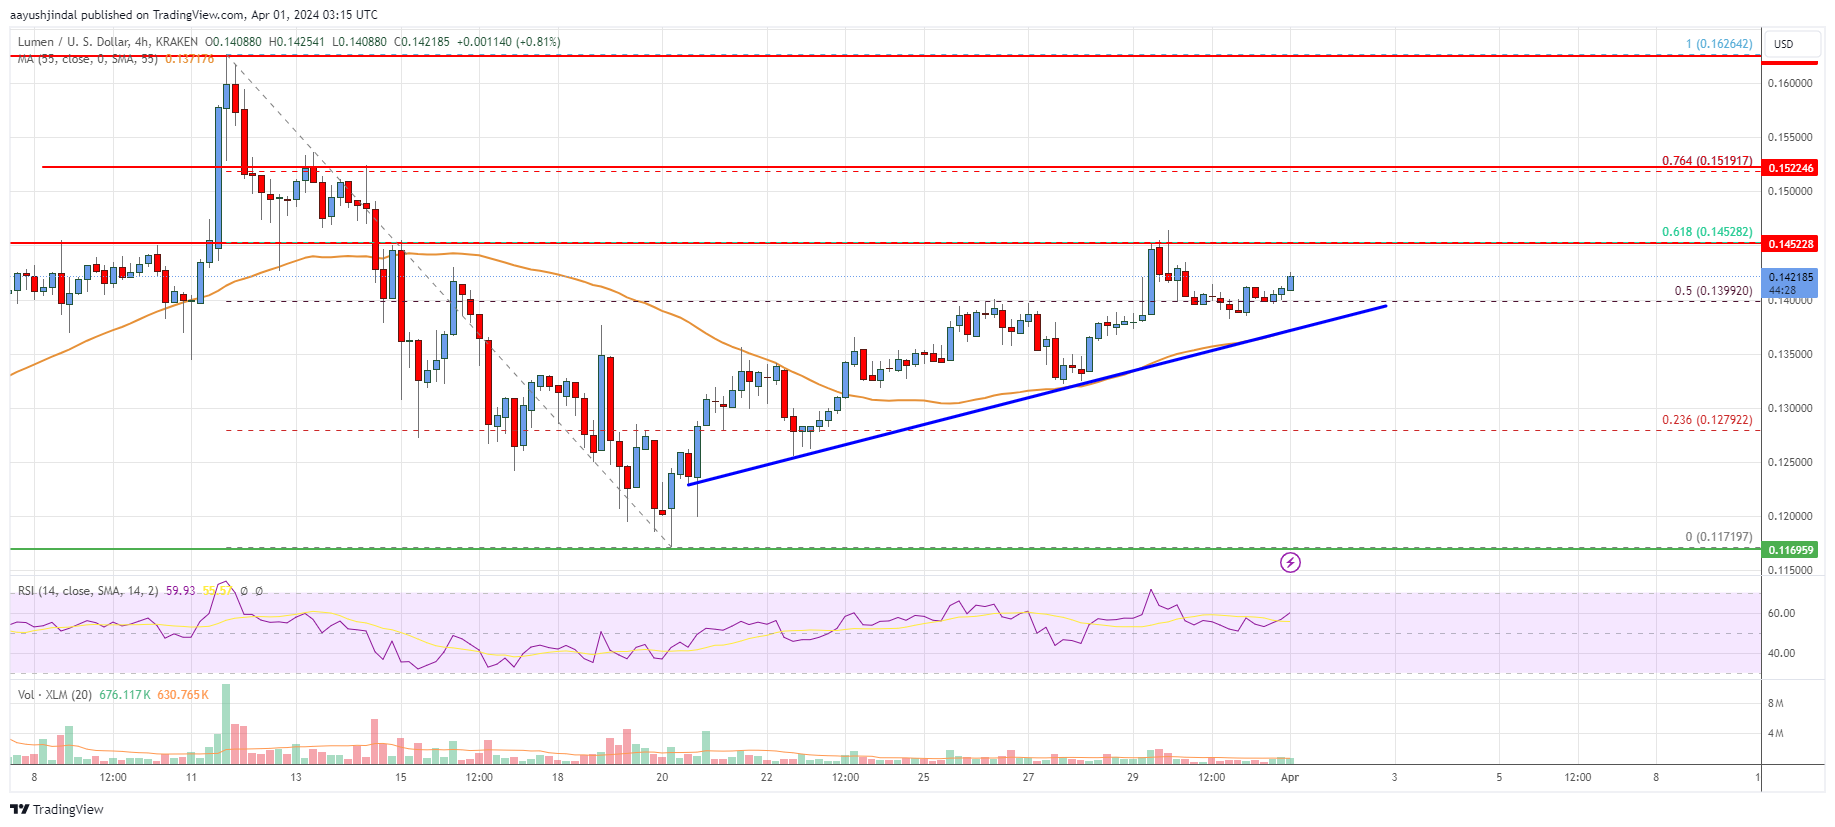 Stellar Lumen (XLM) Price Turns Green And Could Rally To $0.165